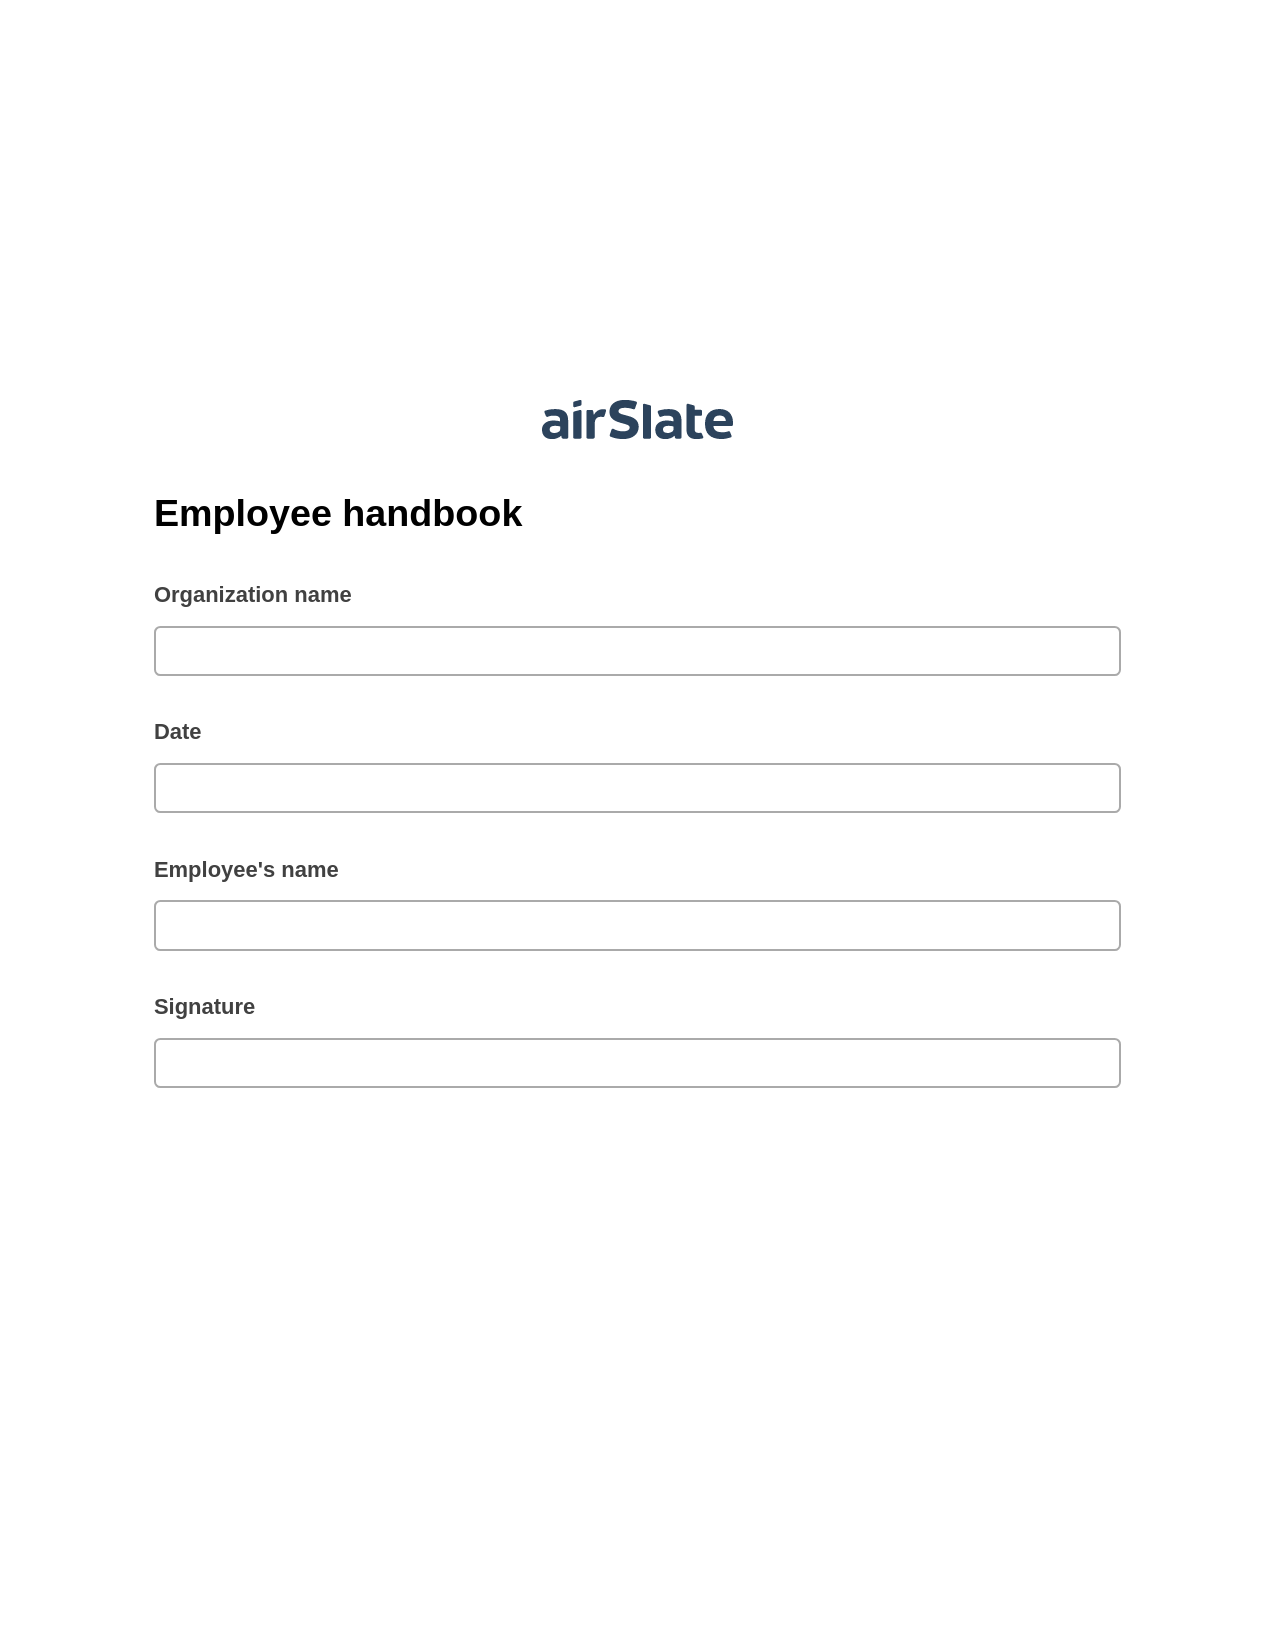 Employee handbook Pre-fill from another Slate Bot, Reminder Bot, Export to Excel 365 Bot